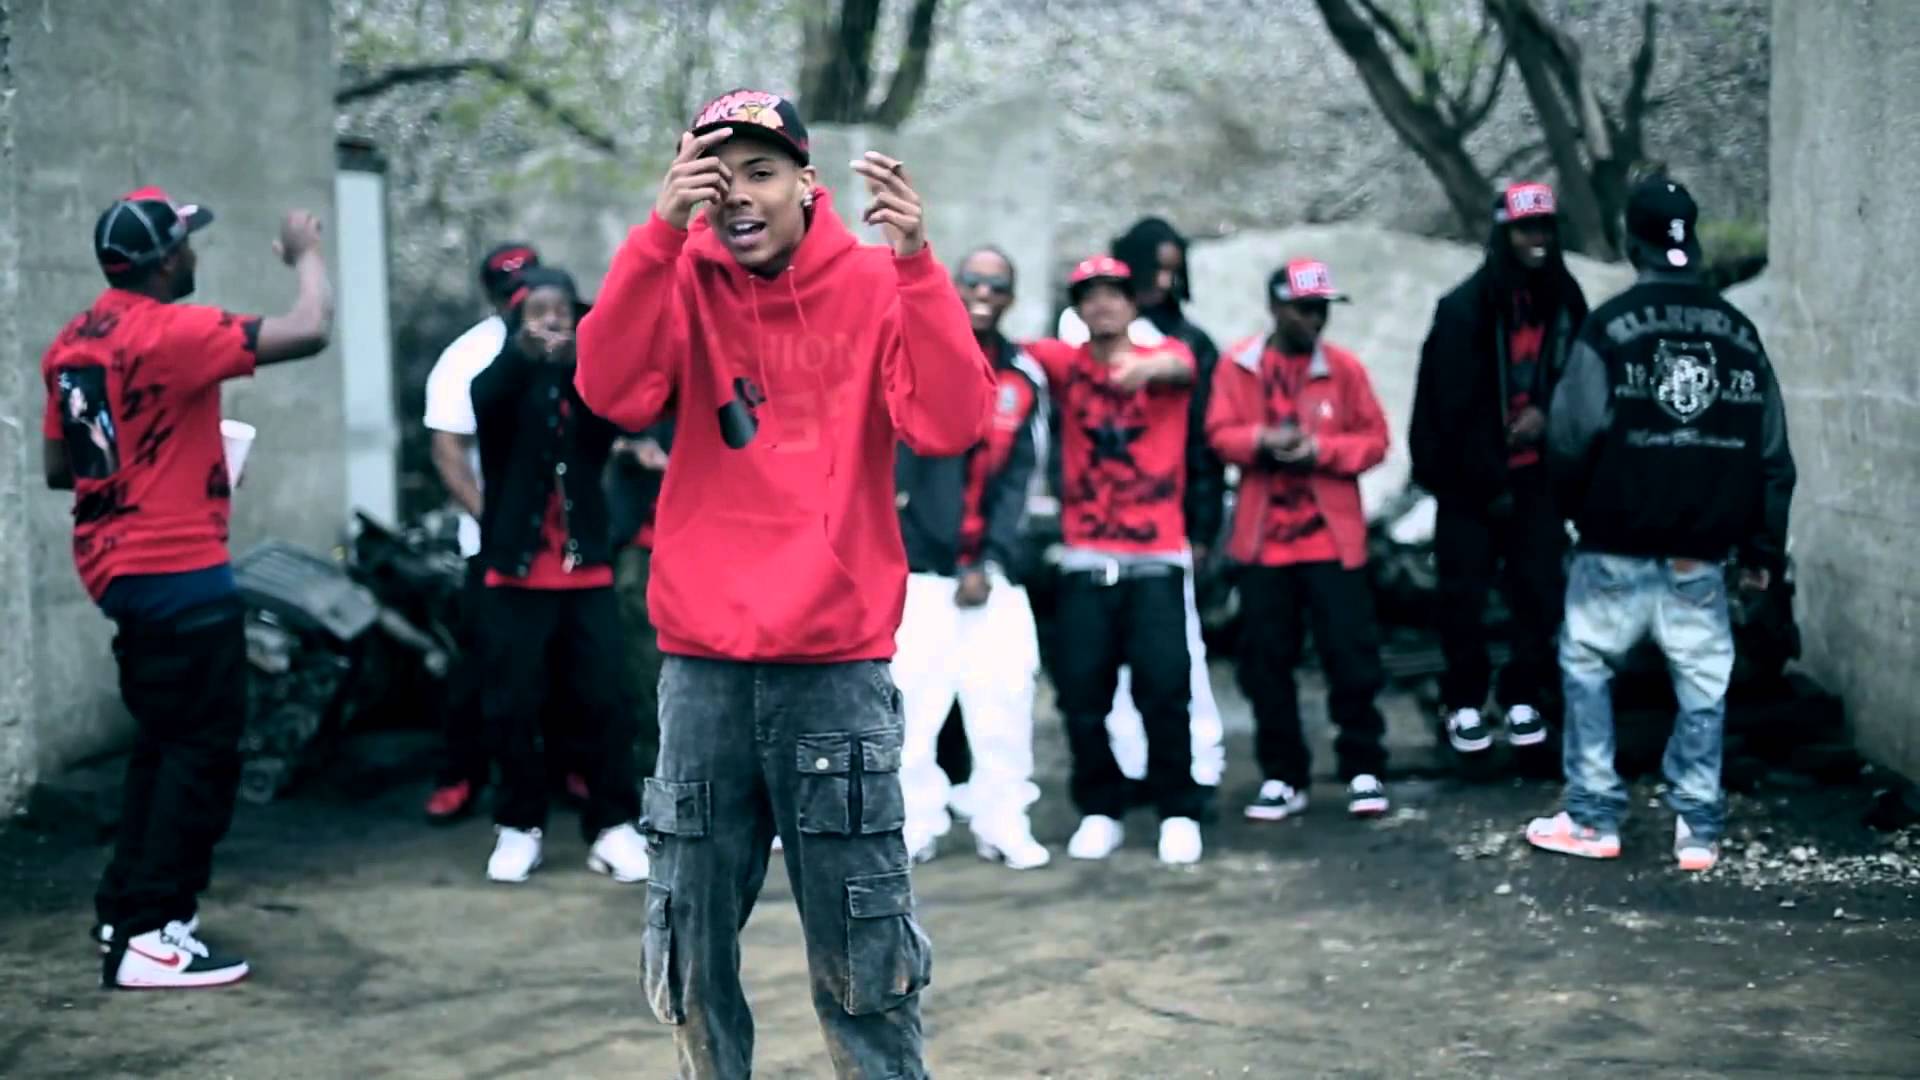 Lil Herb - "Fight or Flight" ft. Common & Chance the Rapper (Video)